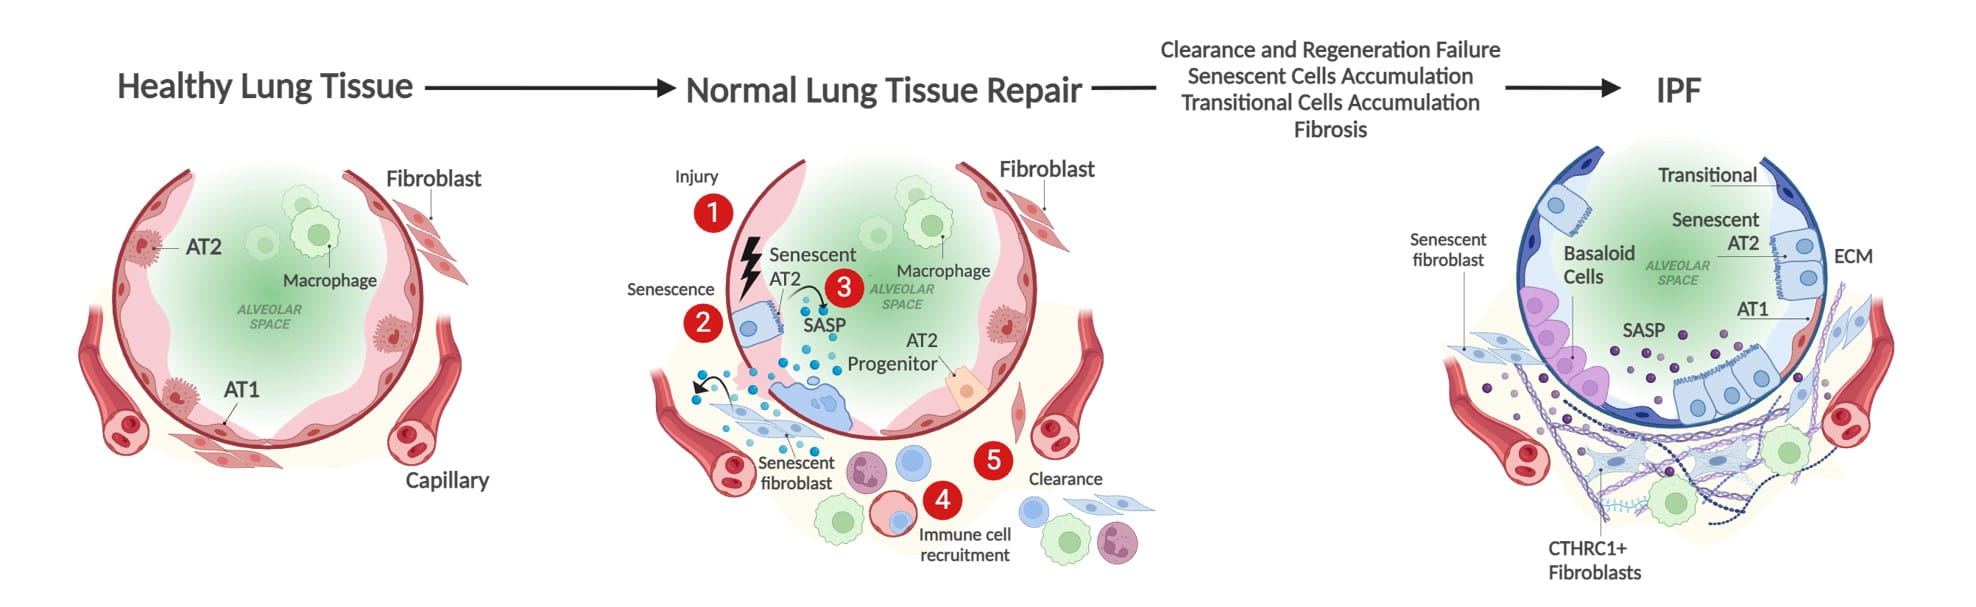 A proposed pathogenic model of Idiopathic Pulmonary Fibrosis in response to persistent injury and altered lung tissue repair.